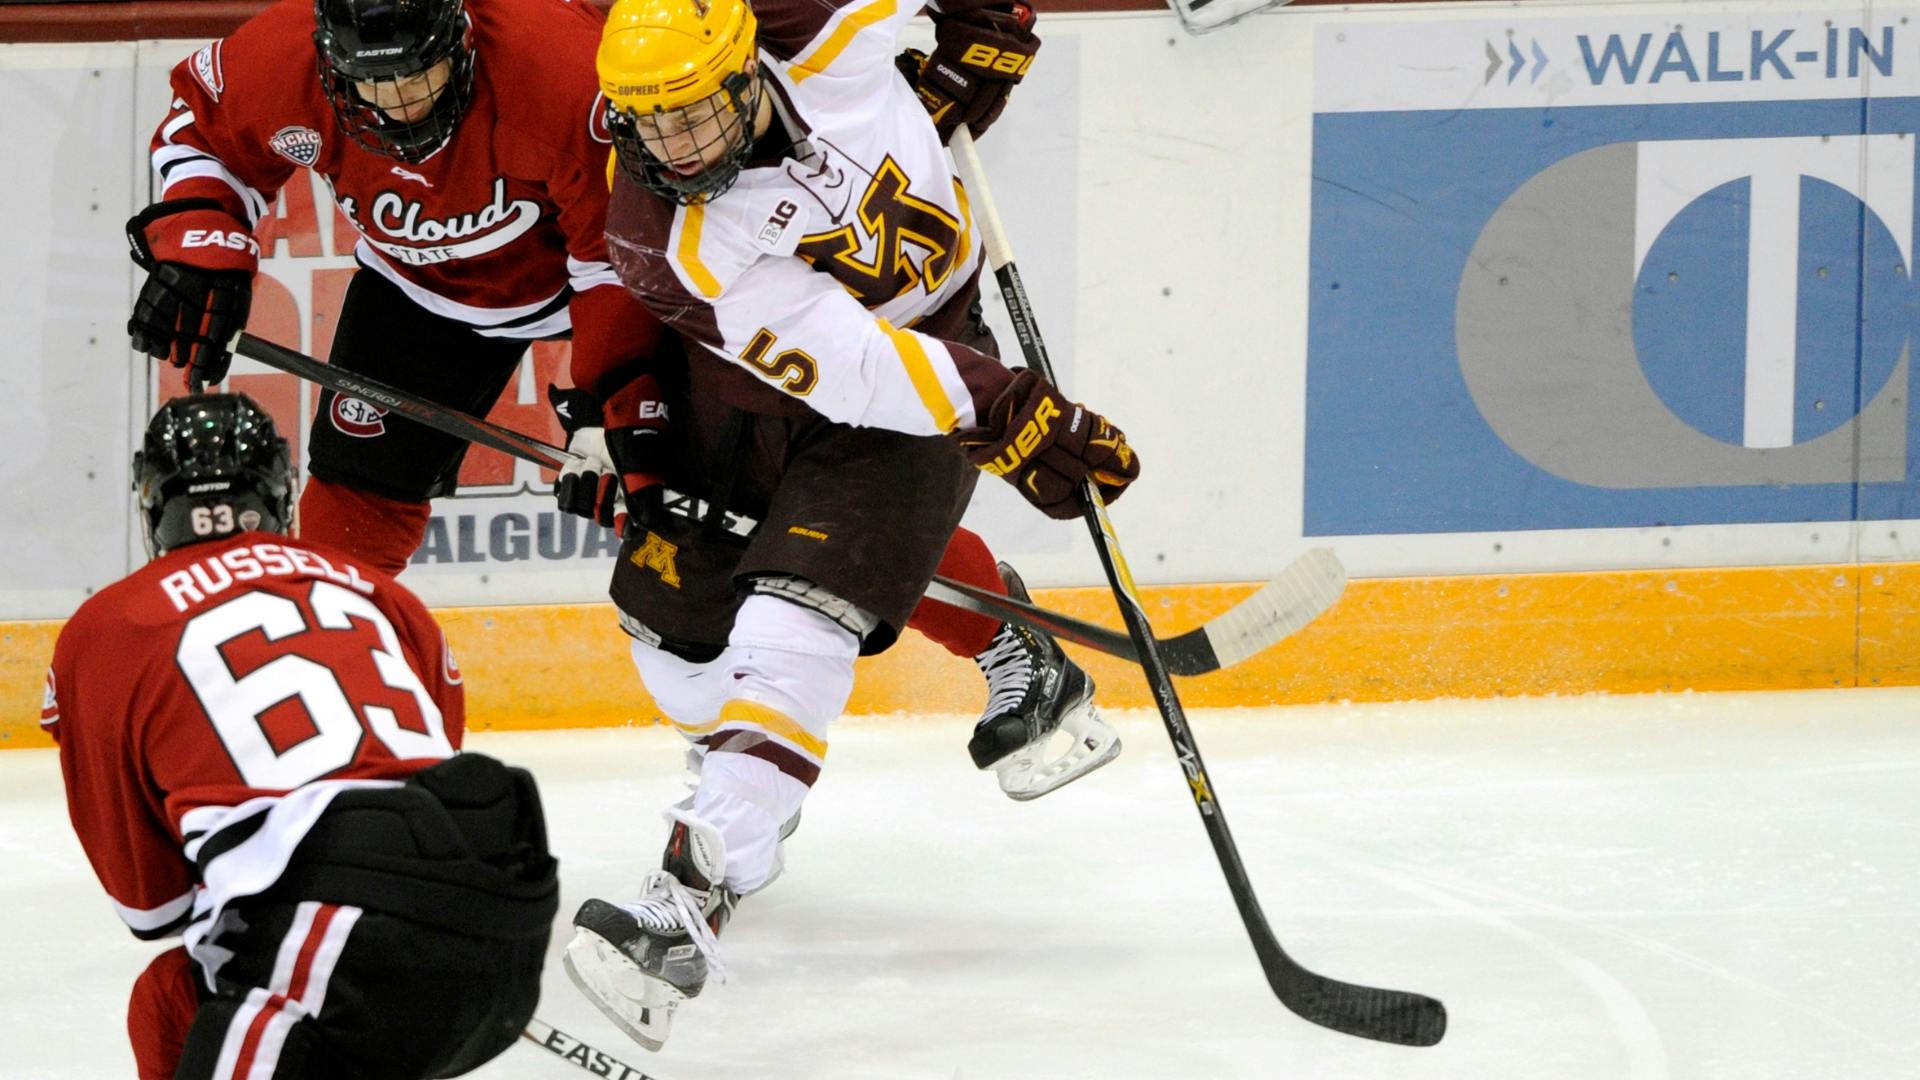 Gophers sophomore forward Justin Kloos completed the hat trick in a 4-3 overtime victory against in-state rival St. Cloud State.